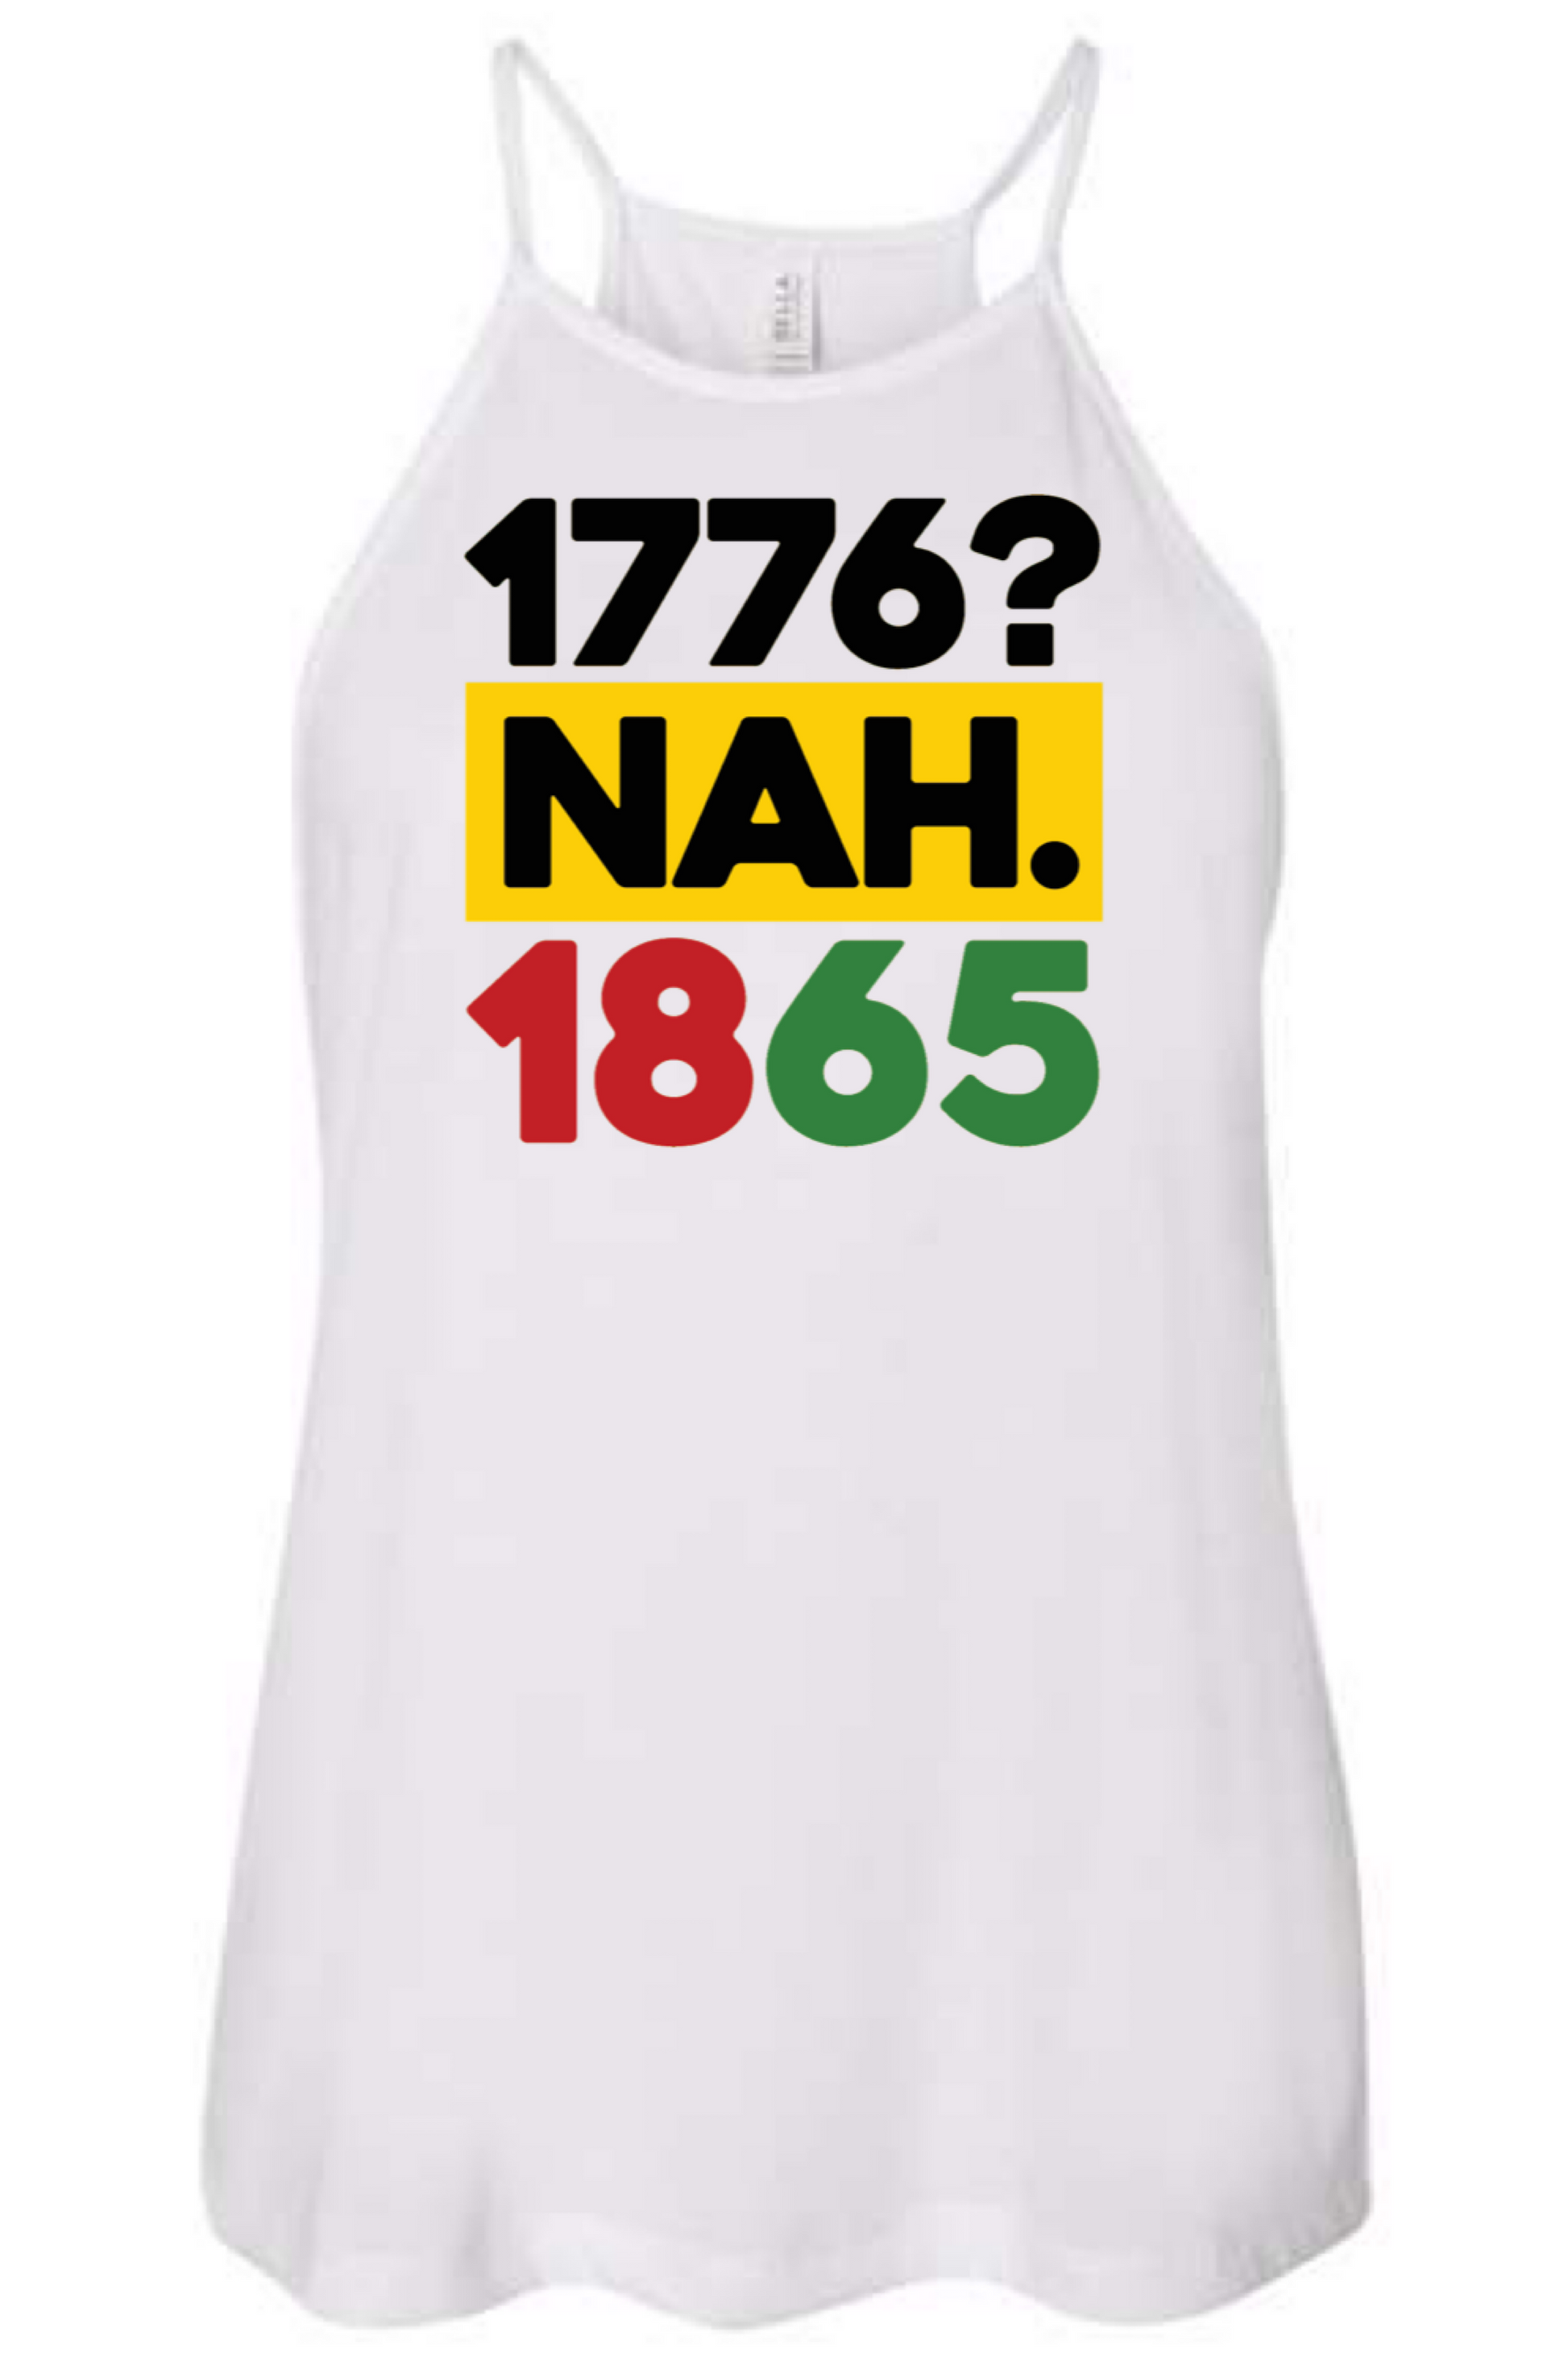 White fitness tank for Juneteenth and Black women